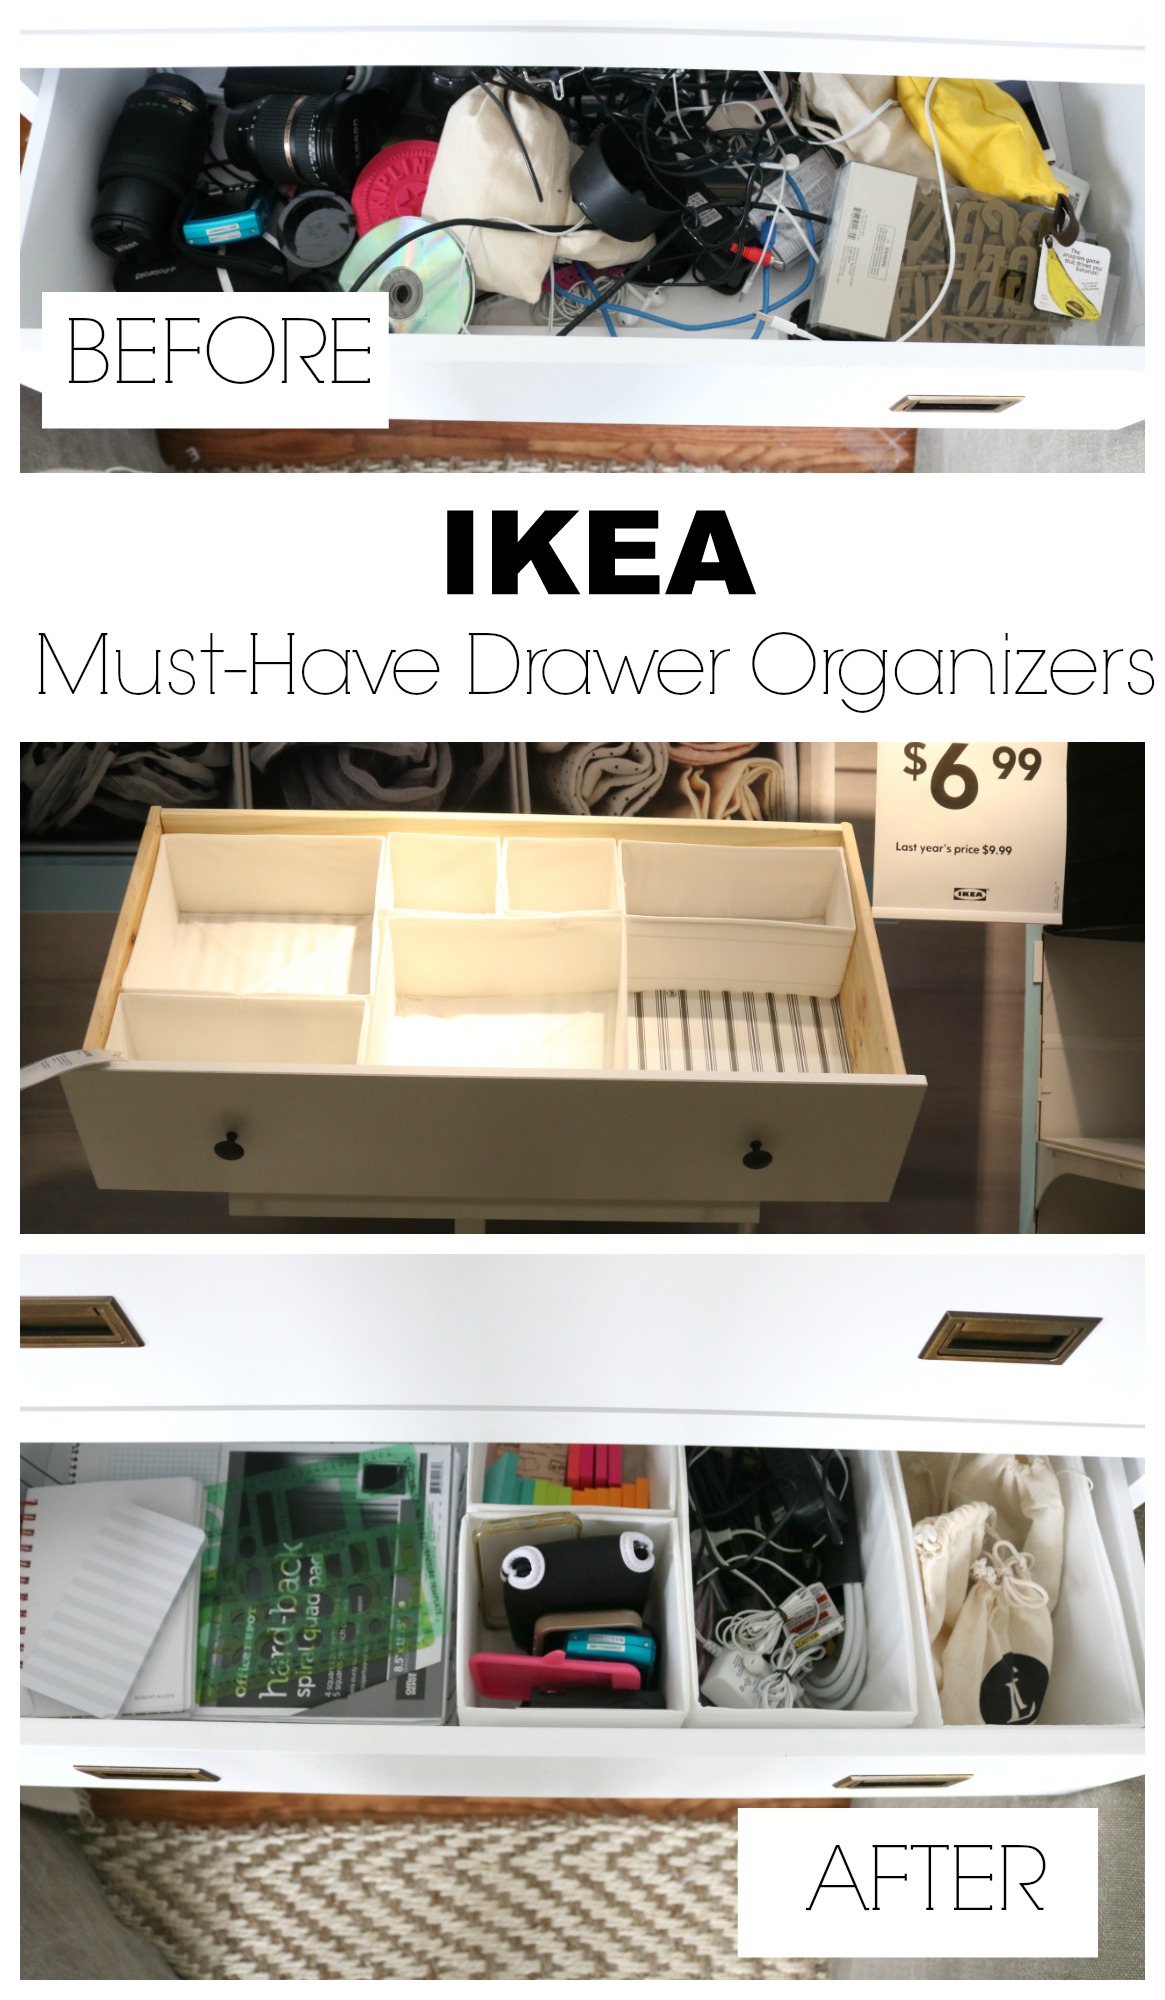 IKEA Favorite Finds- You need on your List!